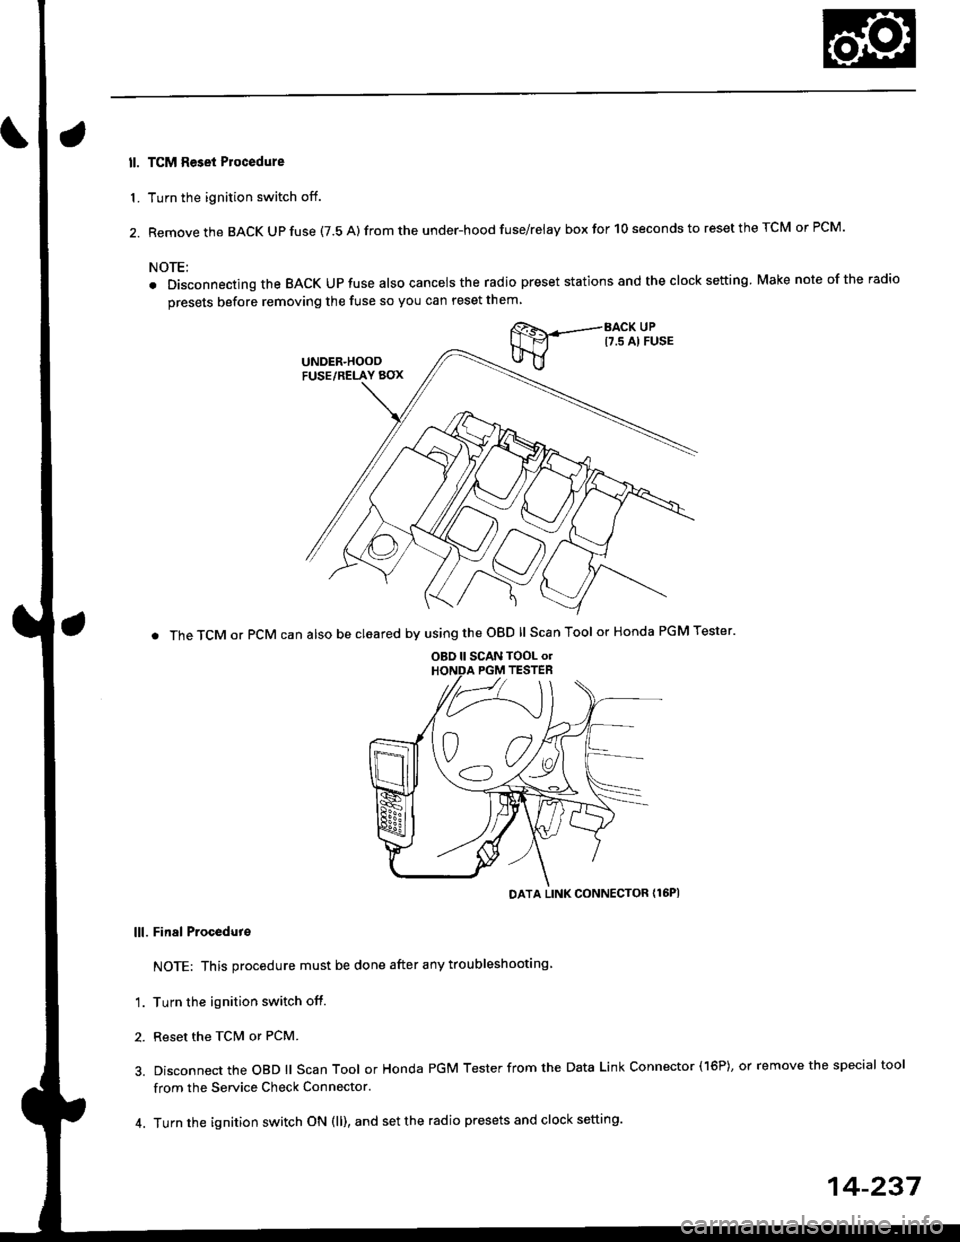 HONDA CIVIC 1998 6.G Workshop Manual ll. TCM Reset Plocedure
1. Turn the ignition switch off.
2. Remove the BACK Up fuse (7.5 A) from the under-hood fuse/relay box for 10 seconds to reset the TCM or PCM.
NOTE:
. Disconnecting the BACK UP